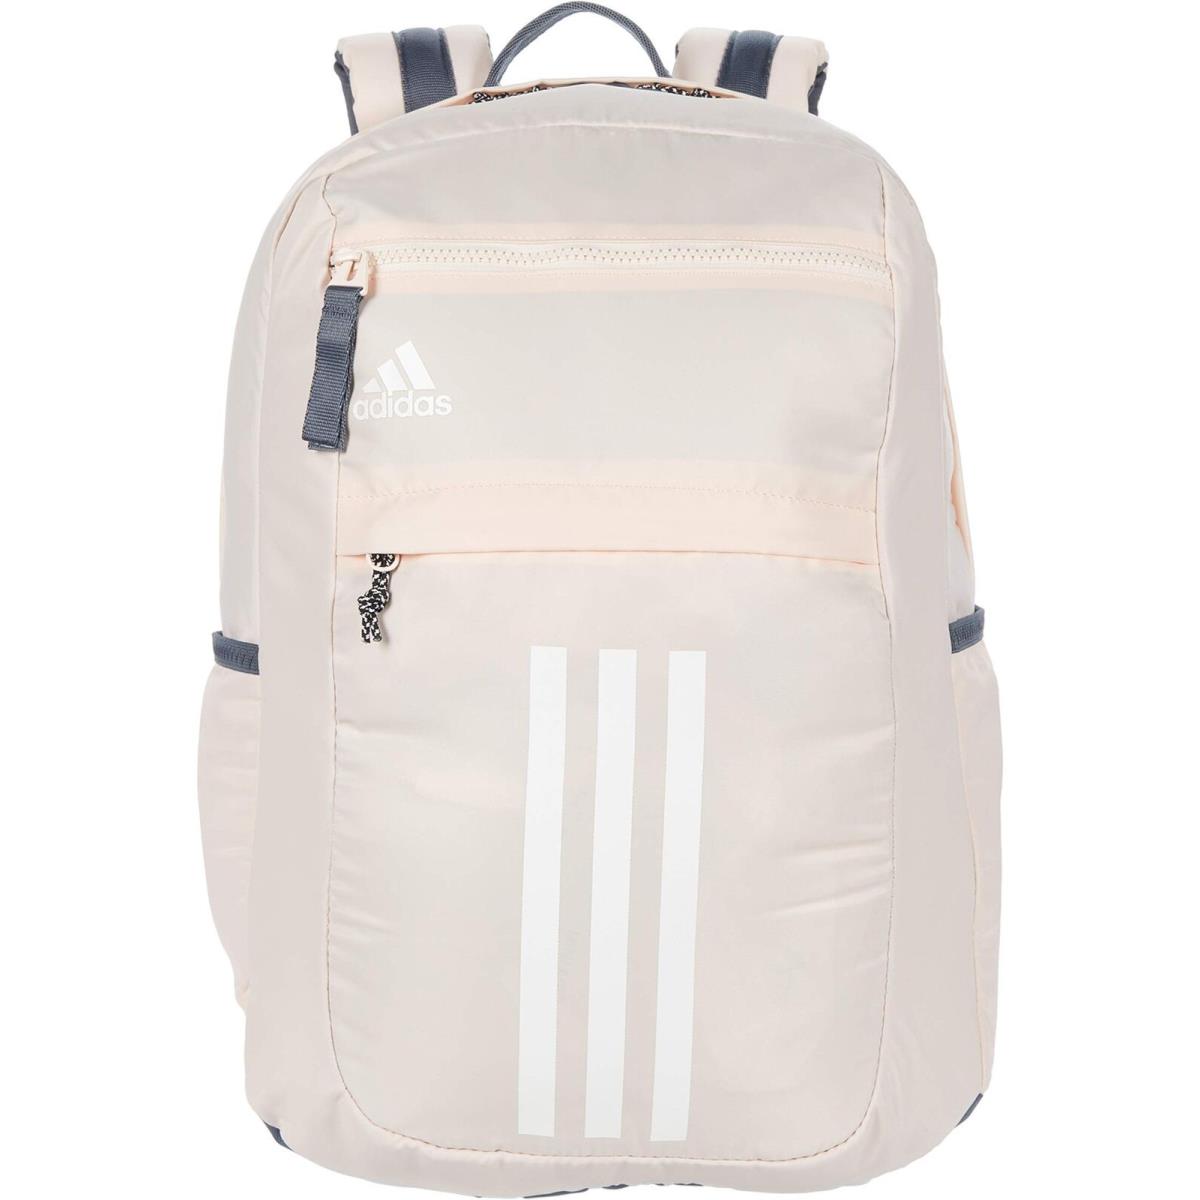 Adidas League 3 Stripe Backpack Pink Tint/onix/white One Size